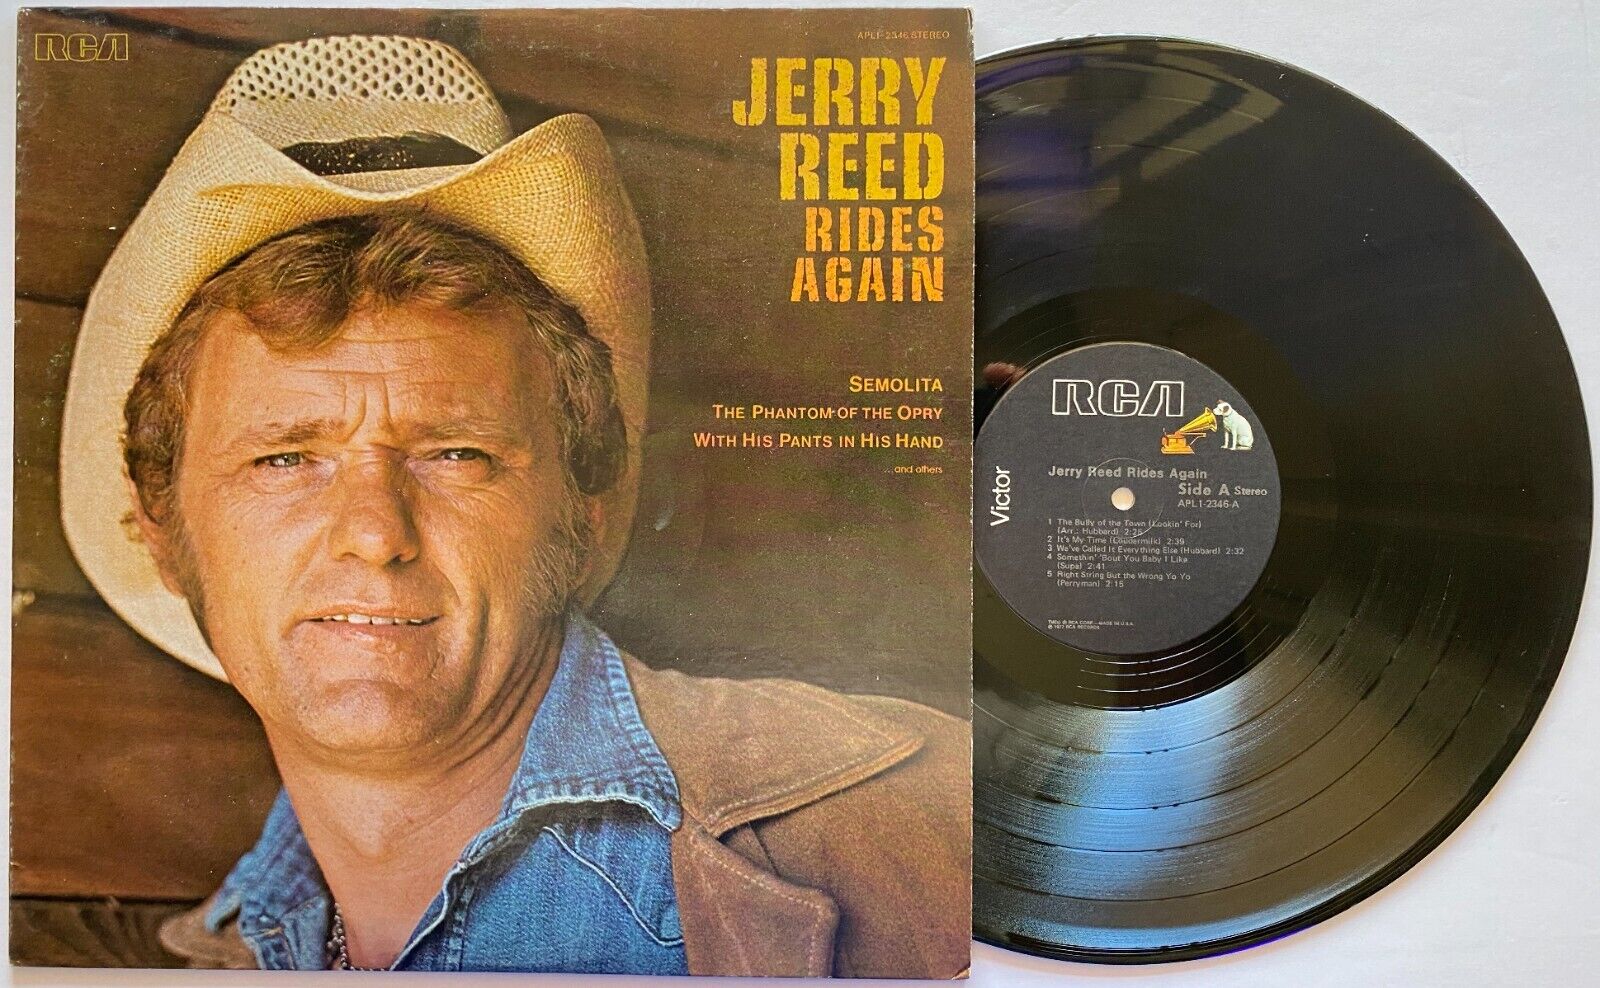 JERRY REED Rides Again 1977 LP Phantom of the Opry Redneck in a Rock & Roll Bar